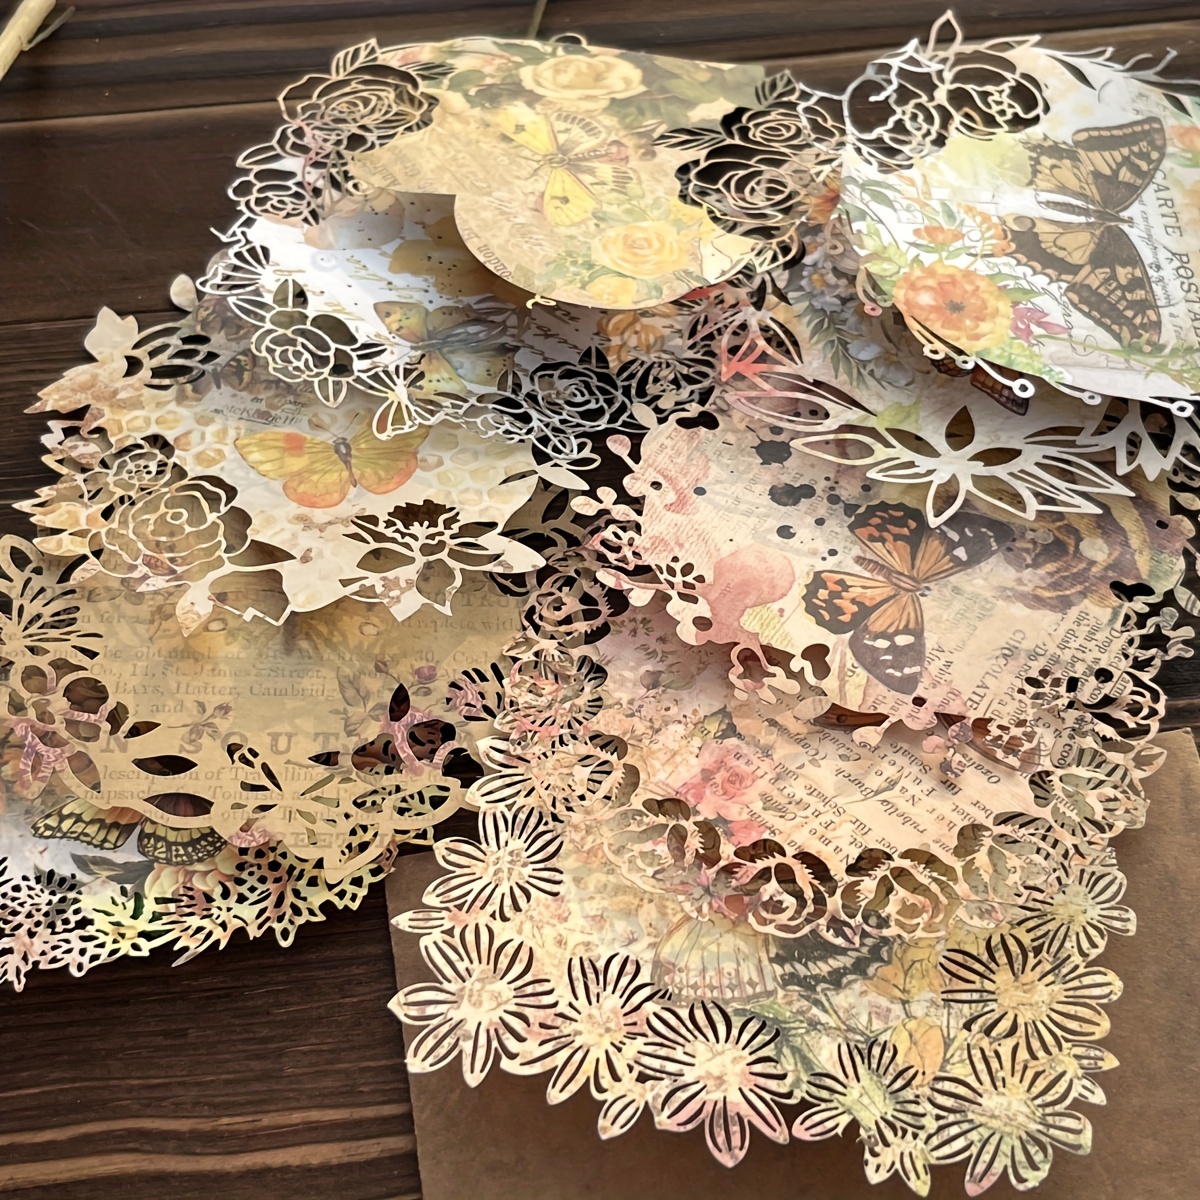 

10pcs Vintage Hollow Lace Material Paper Butterfly Dreamland Series Retro Watercolor Floral Hollow Lace Edge Border Diary Collage Paper Journal Decoration Collage Background Paper